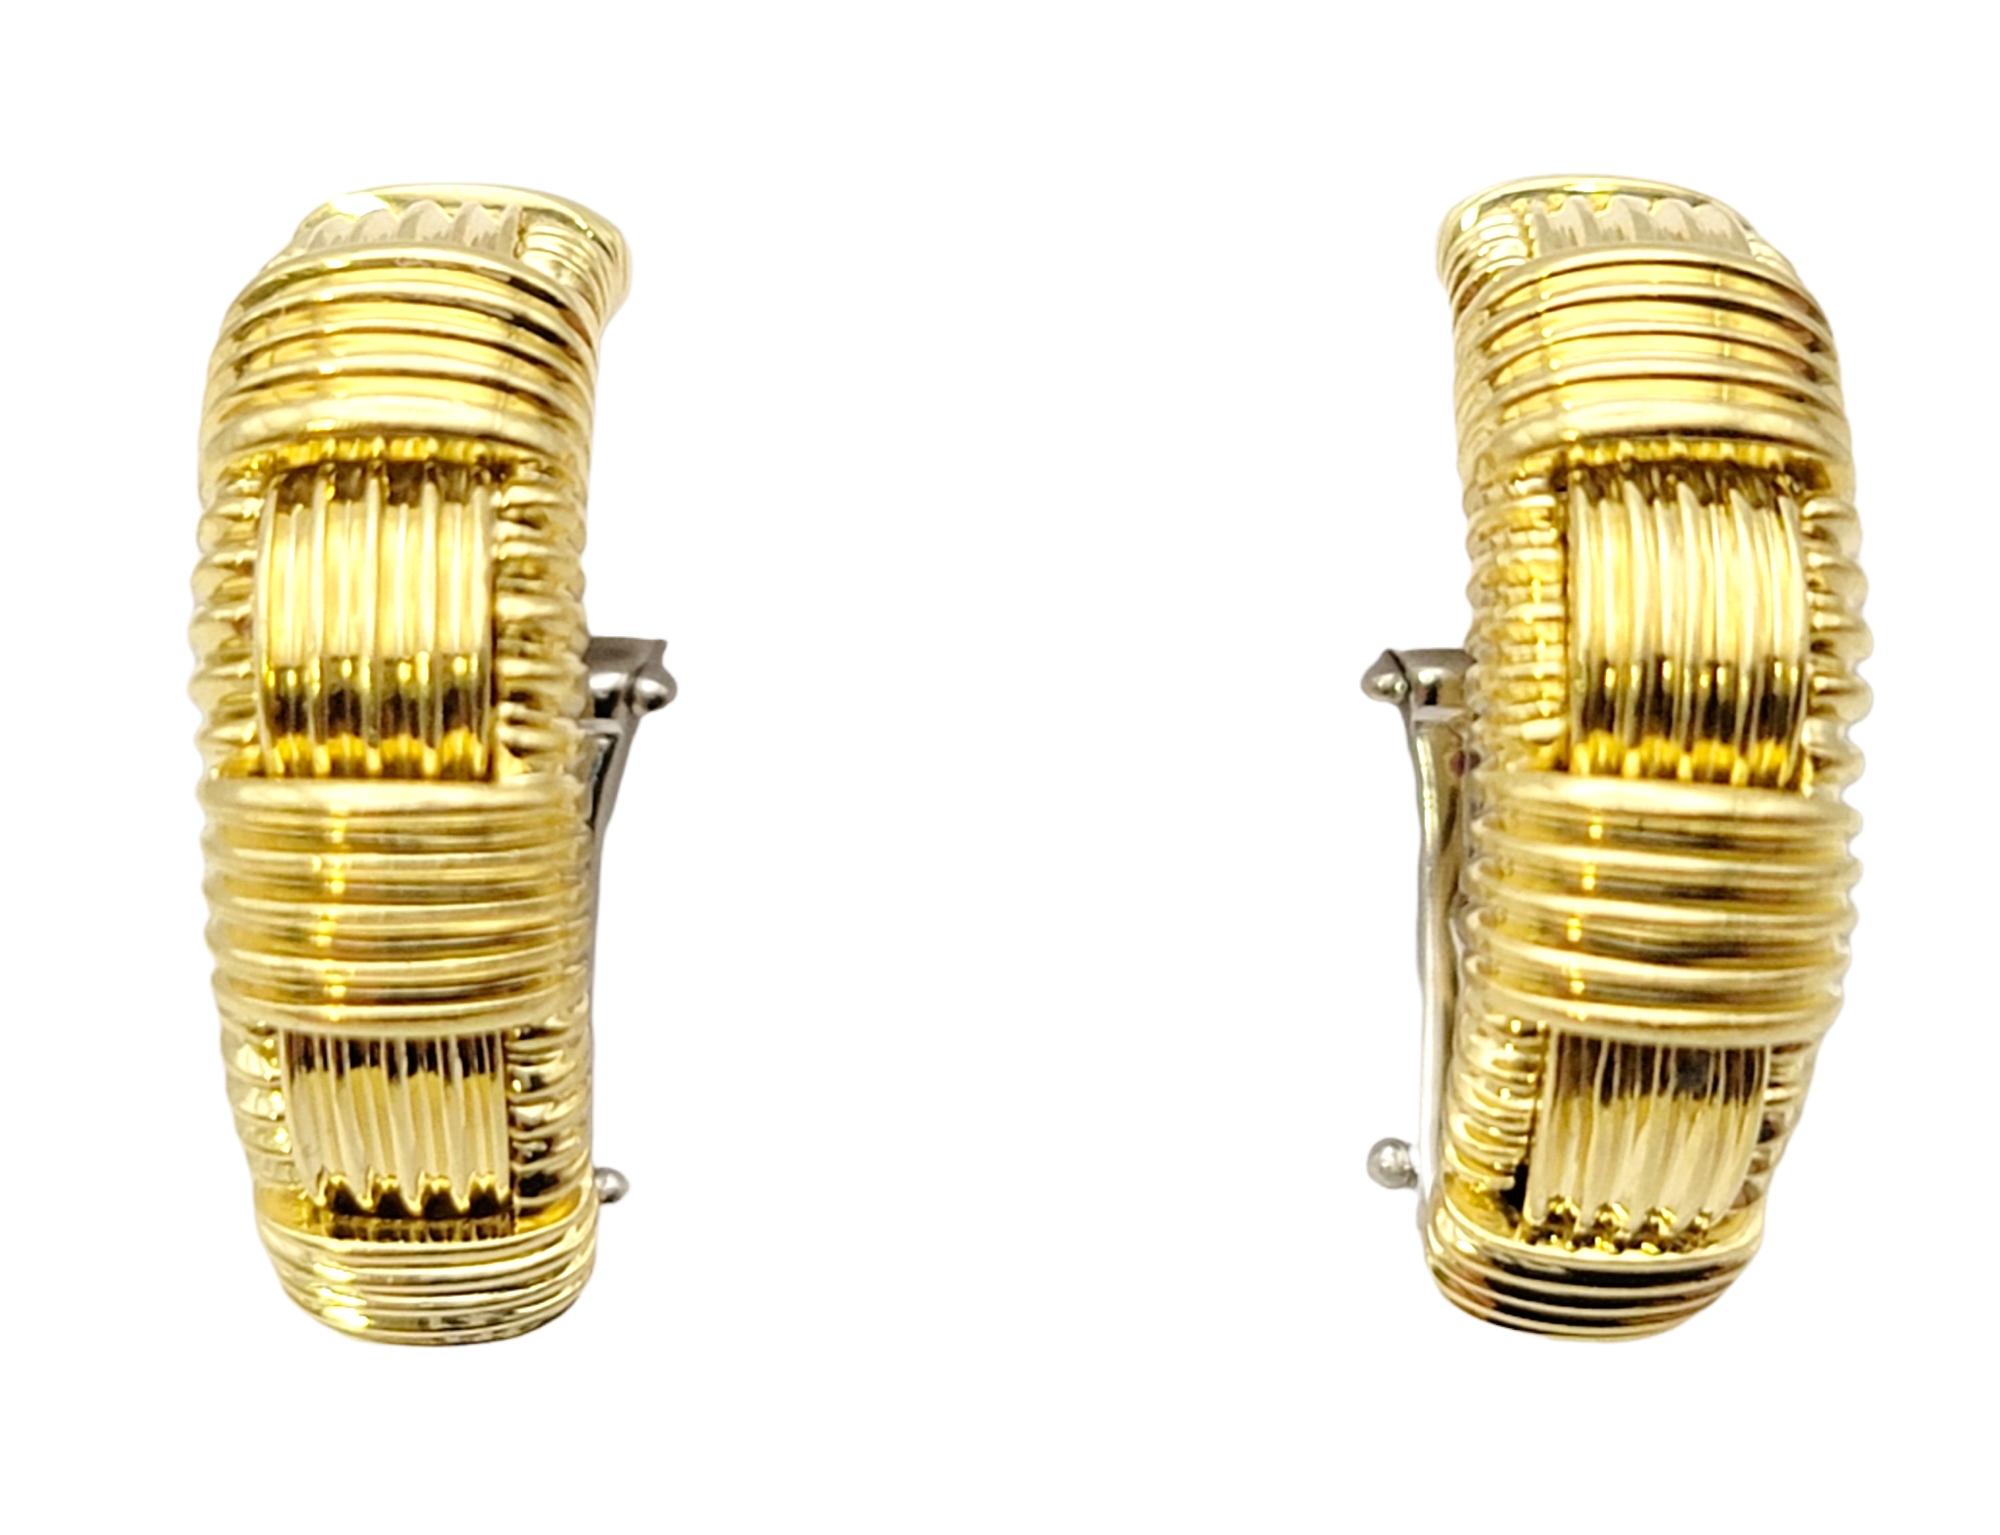 Simple yet stunning half hoop earrings by Italian jewelry designer, Roberto Coin. Part of the Appassionata collection, these earrings feature an 18 karat yellow gold setting with an alternating woven pattern throughout. The rounded shape gently hugs